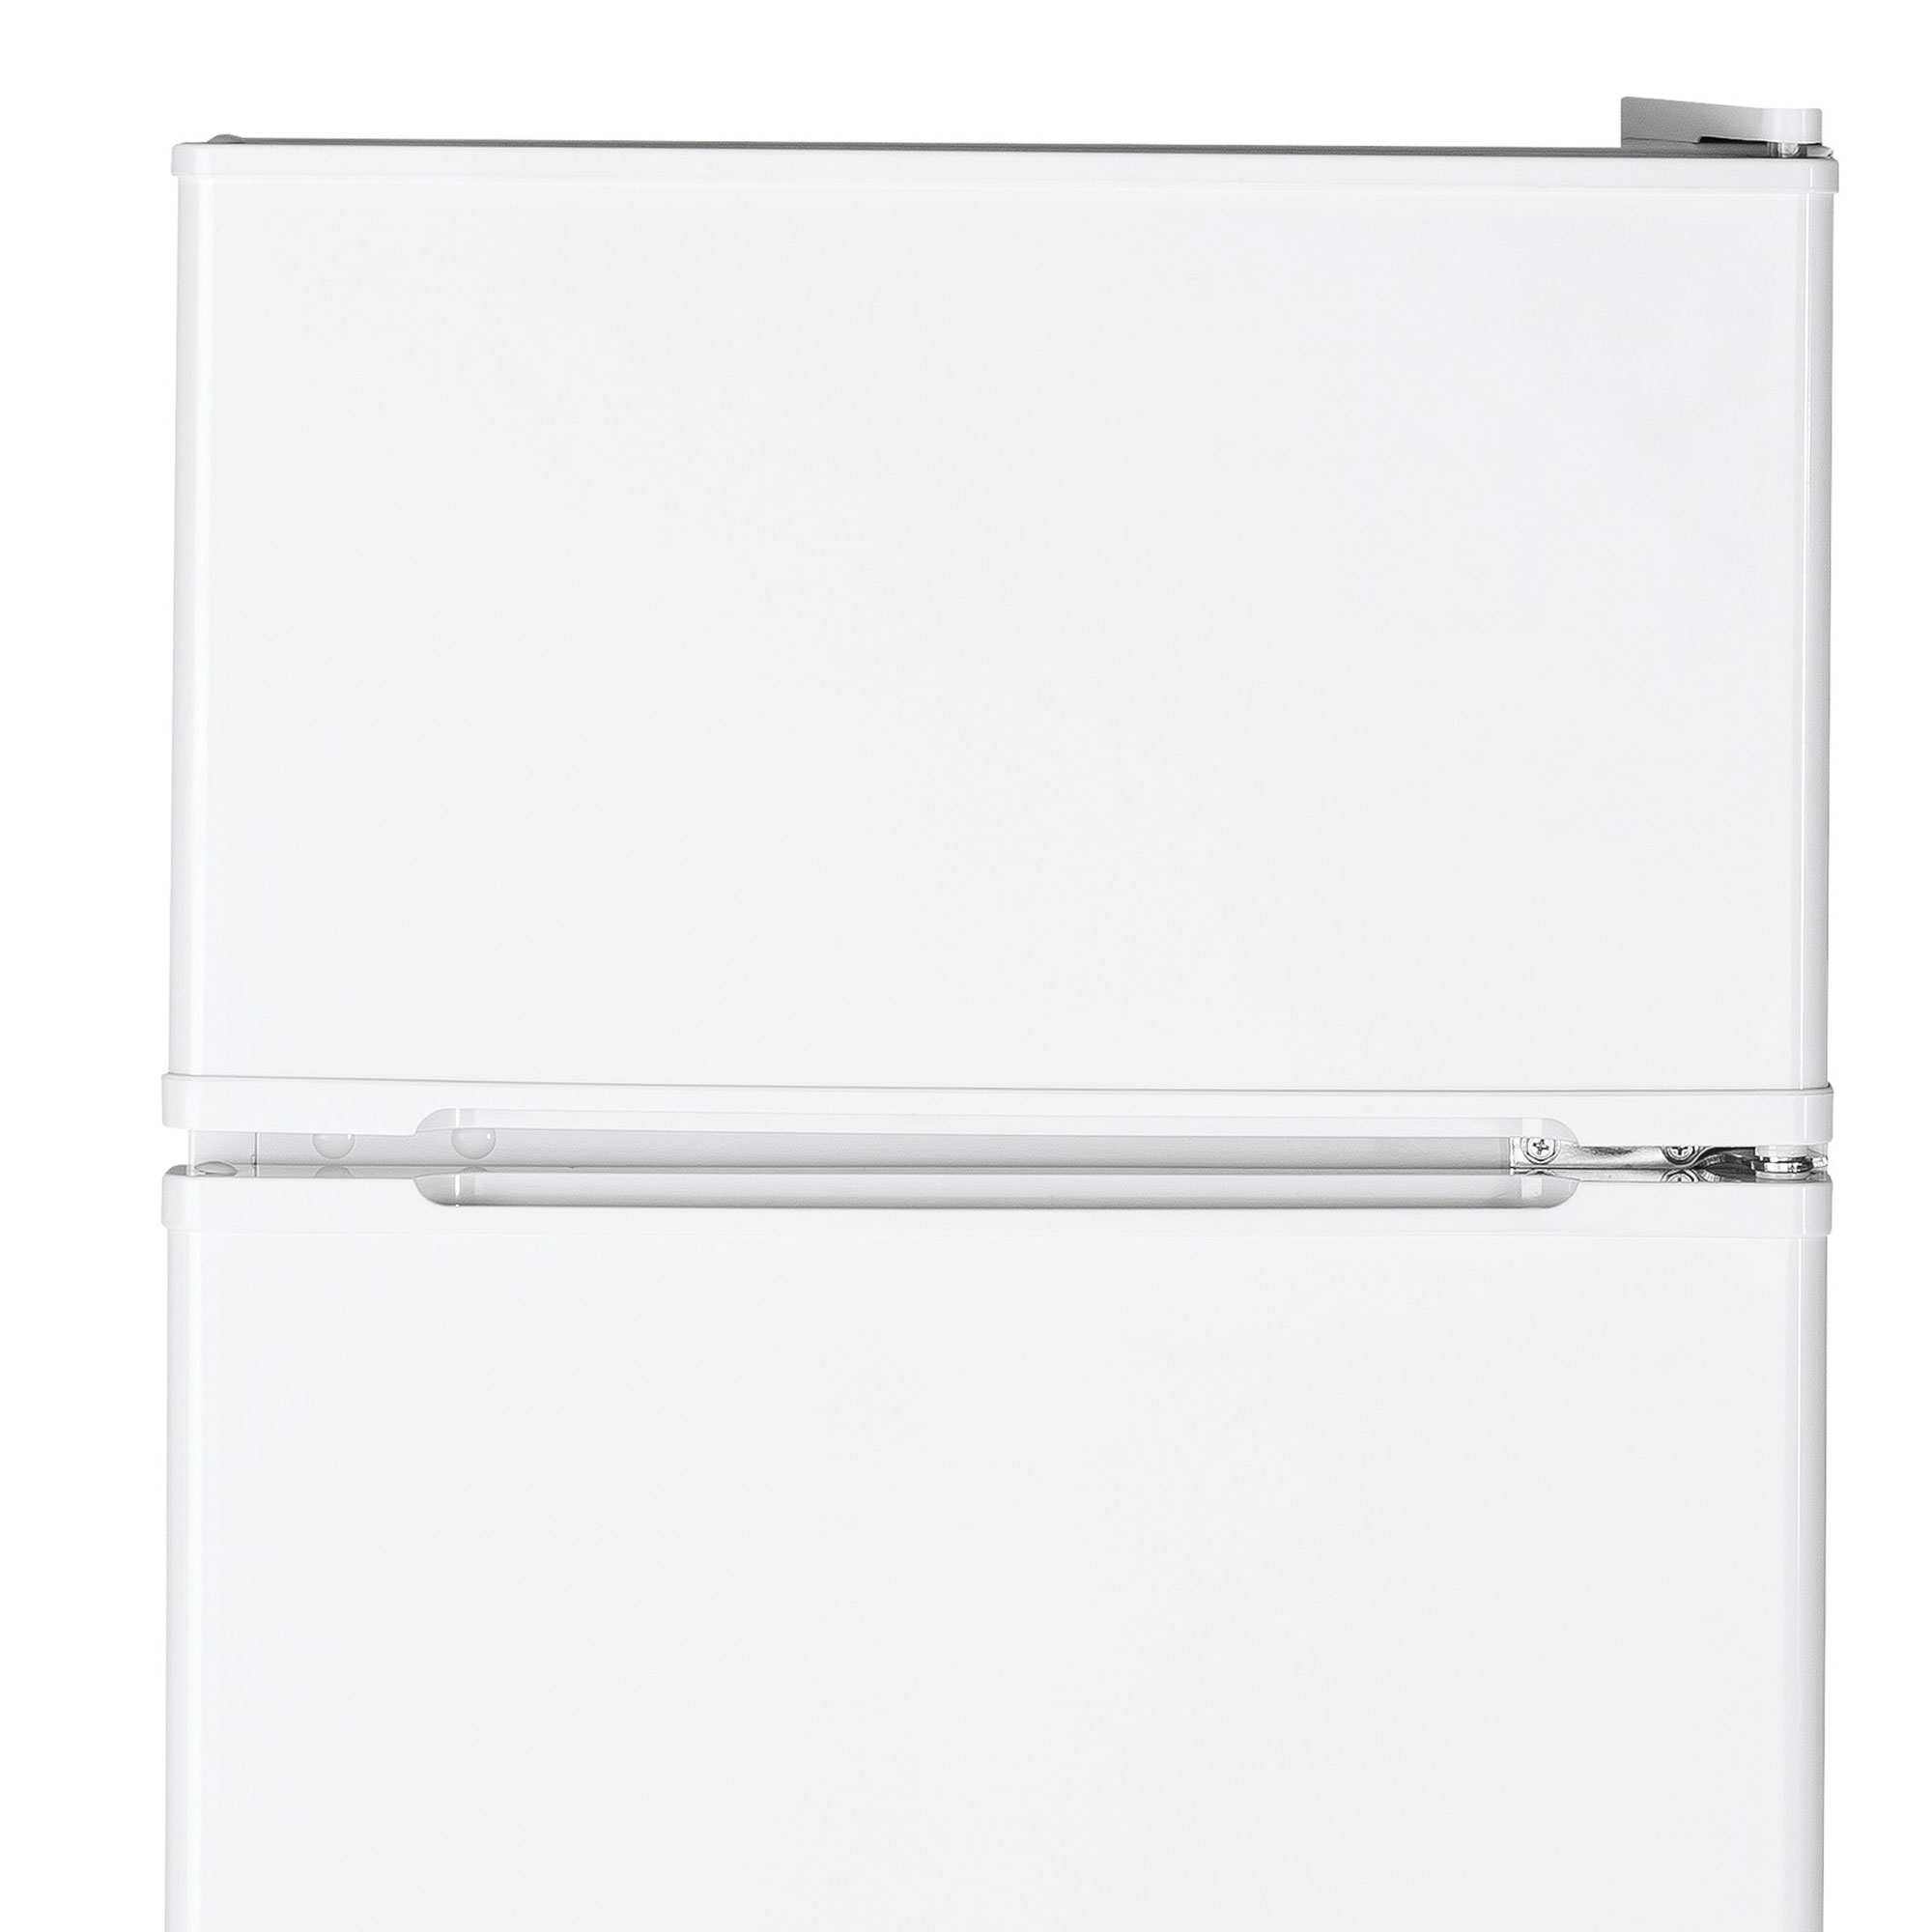 Ge Gde03gk 19" Wide 3.1 Cu. Ft. Energy Star Rated Freestanding Refrigerator - White - image 3 of 5